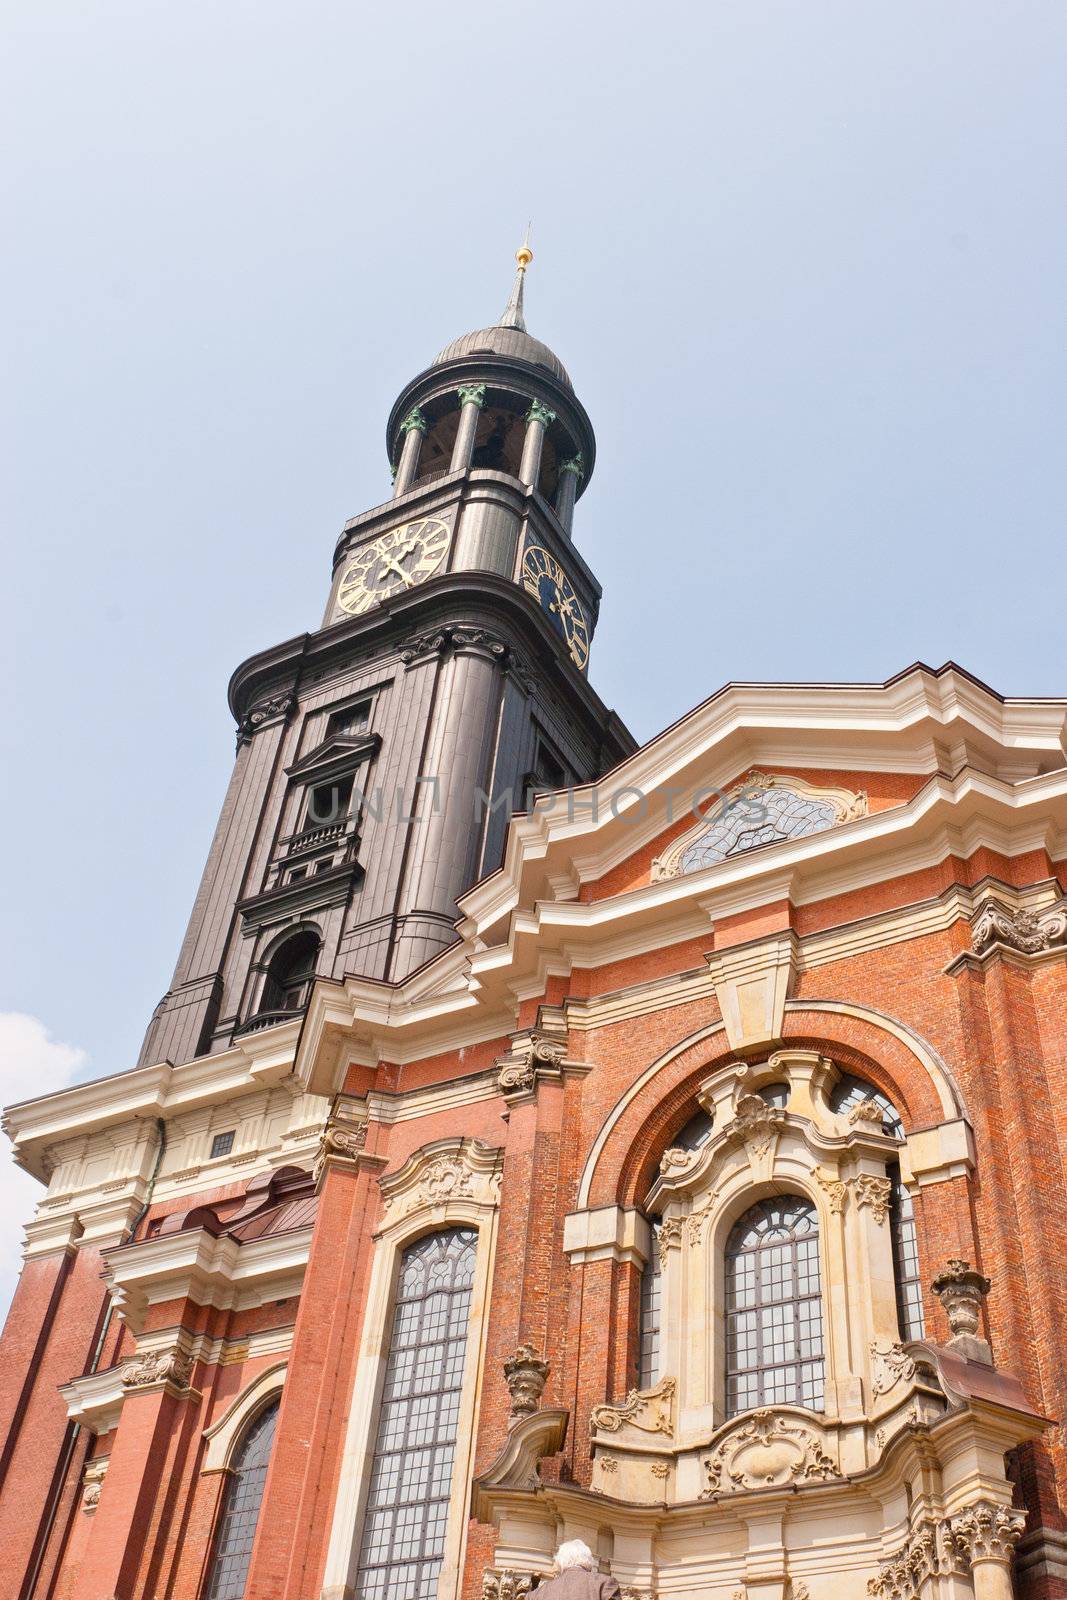 St. Michaelis is the most famous church in the city of Hamburg.